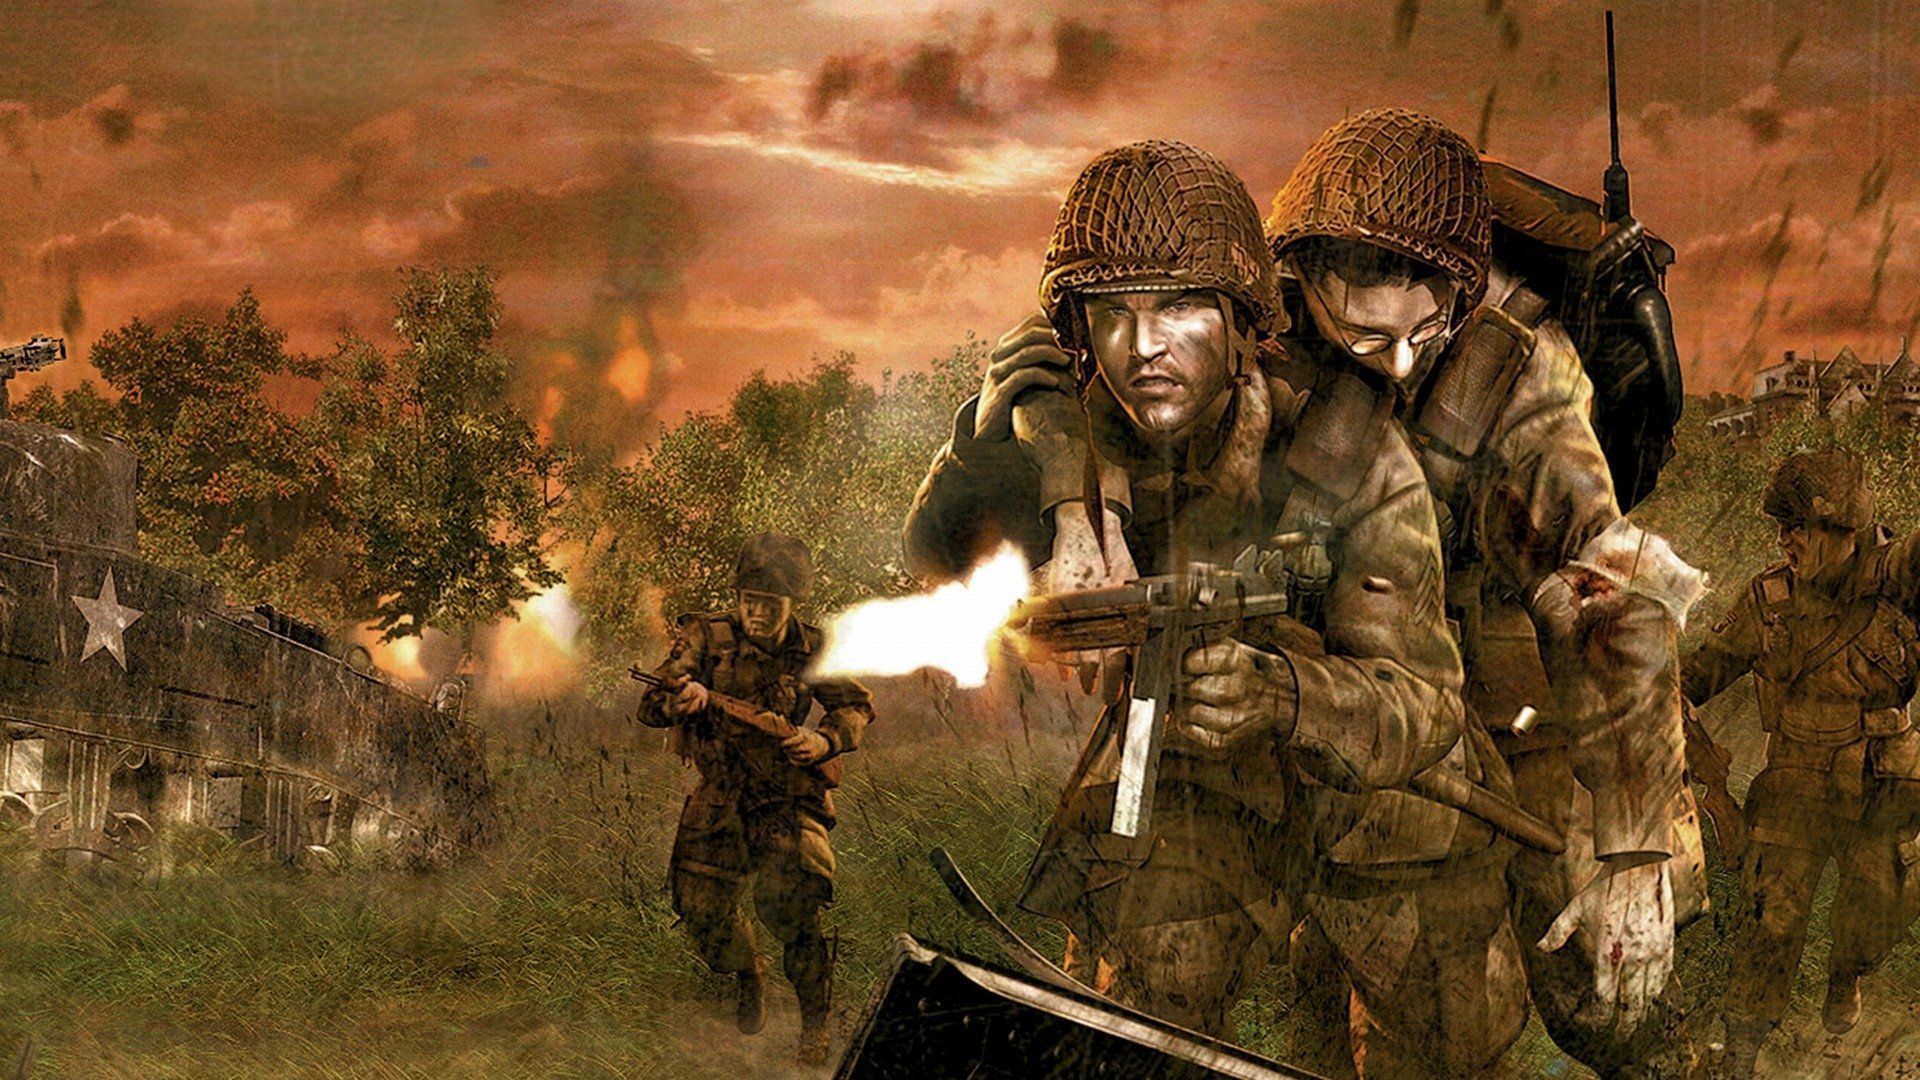 Brothers in Arms: Road to Hill 30 HD Wallpaper. Background